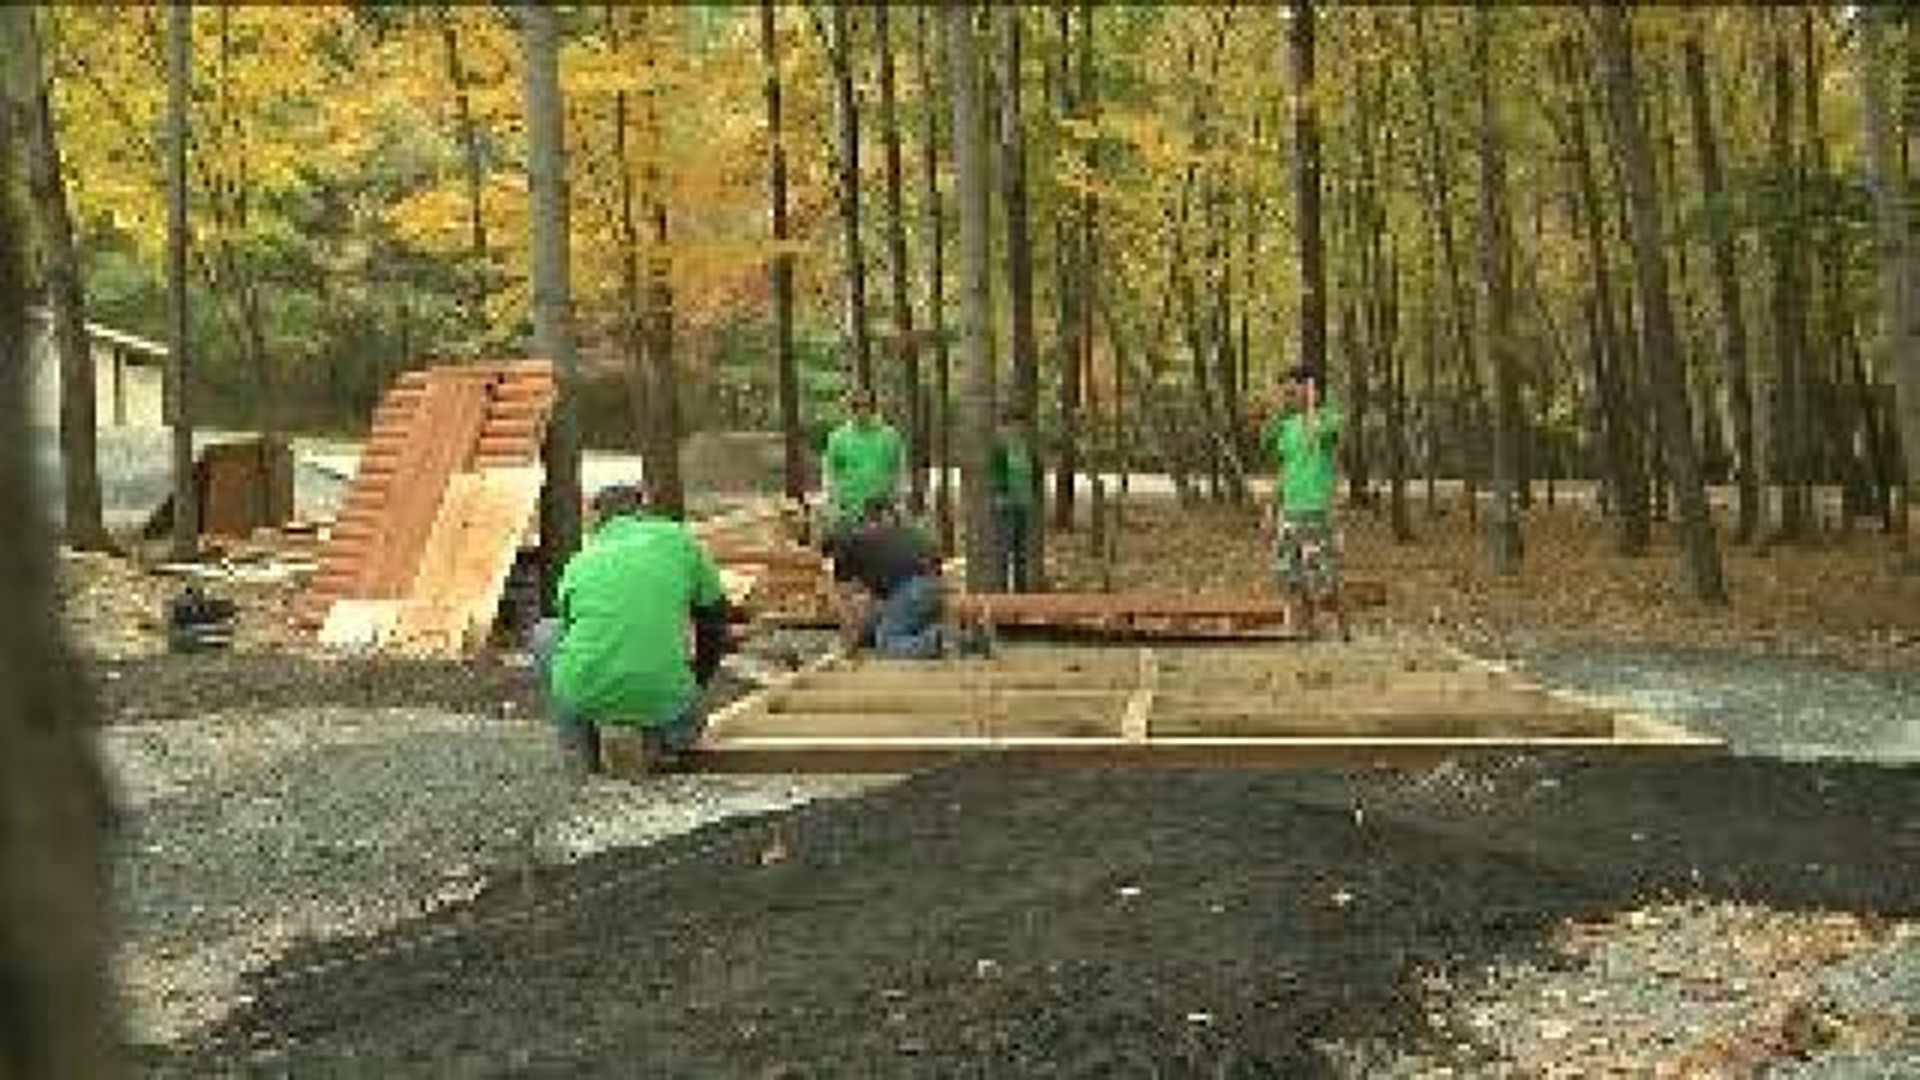 Bank Workers Building Playhouse At McDade Park